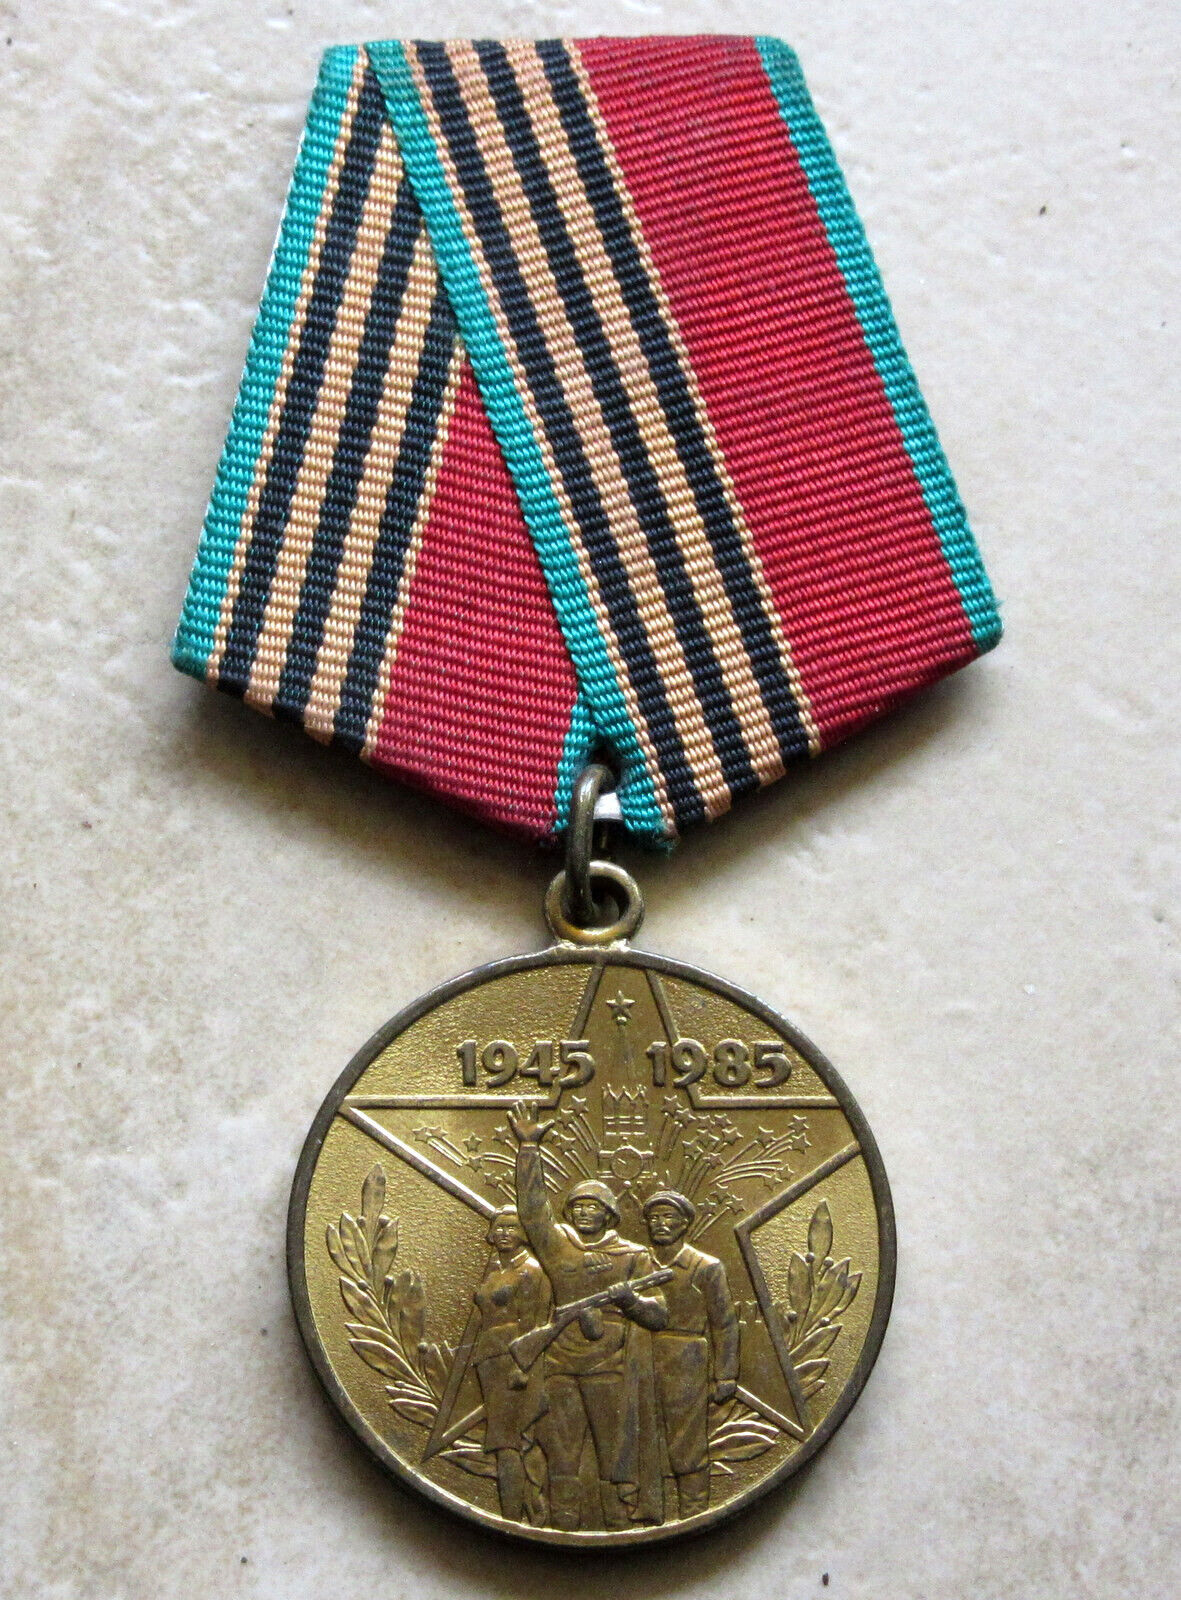 RUSSIA USSR WWII VETERAN MEDAL: 40 YEARS VICTORY ANNIVERSARY 1945 - 1985